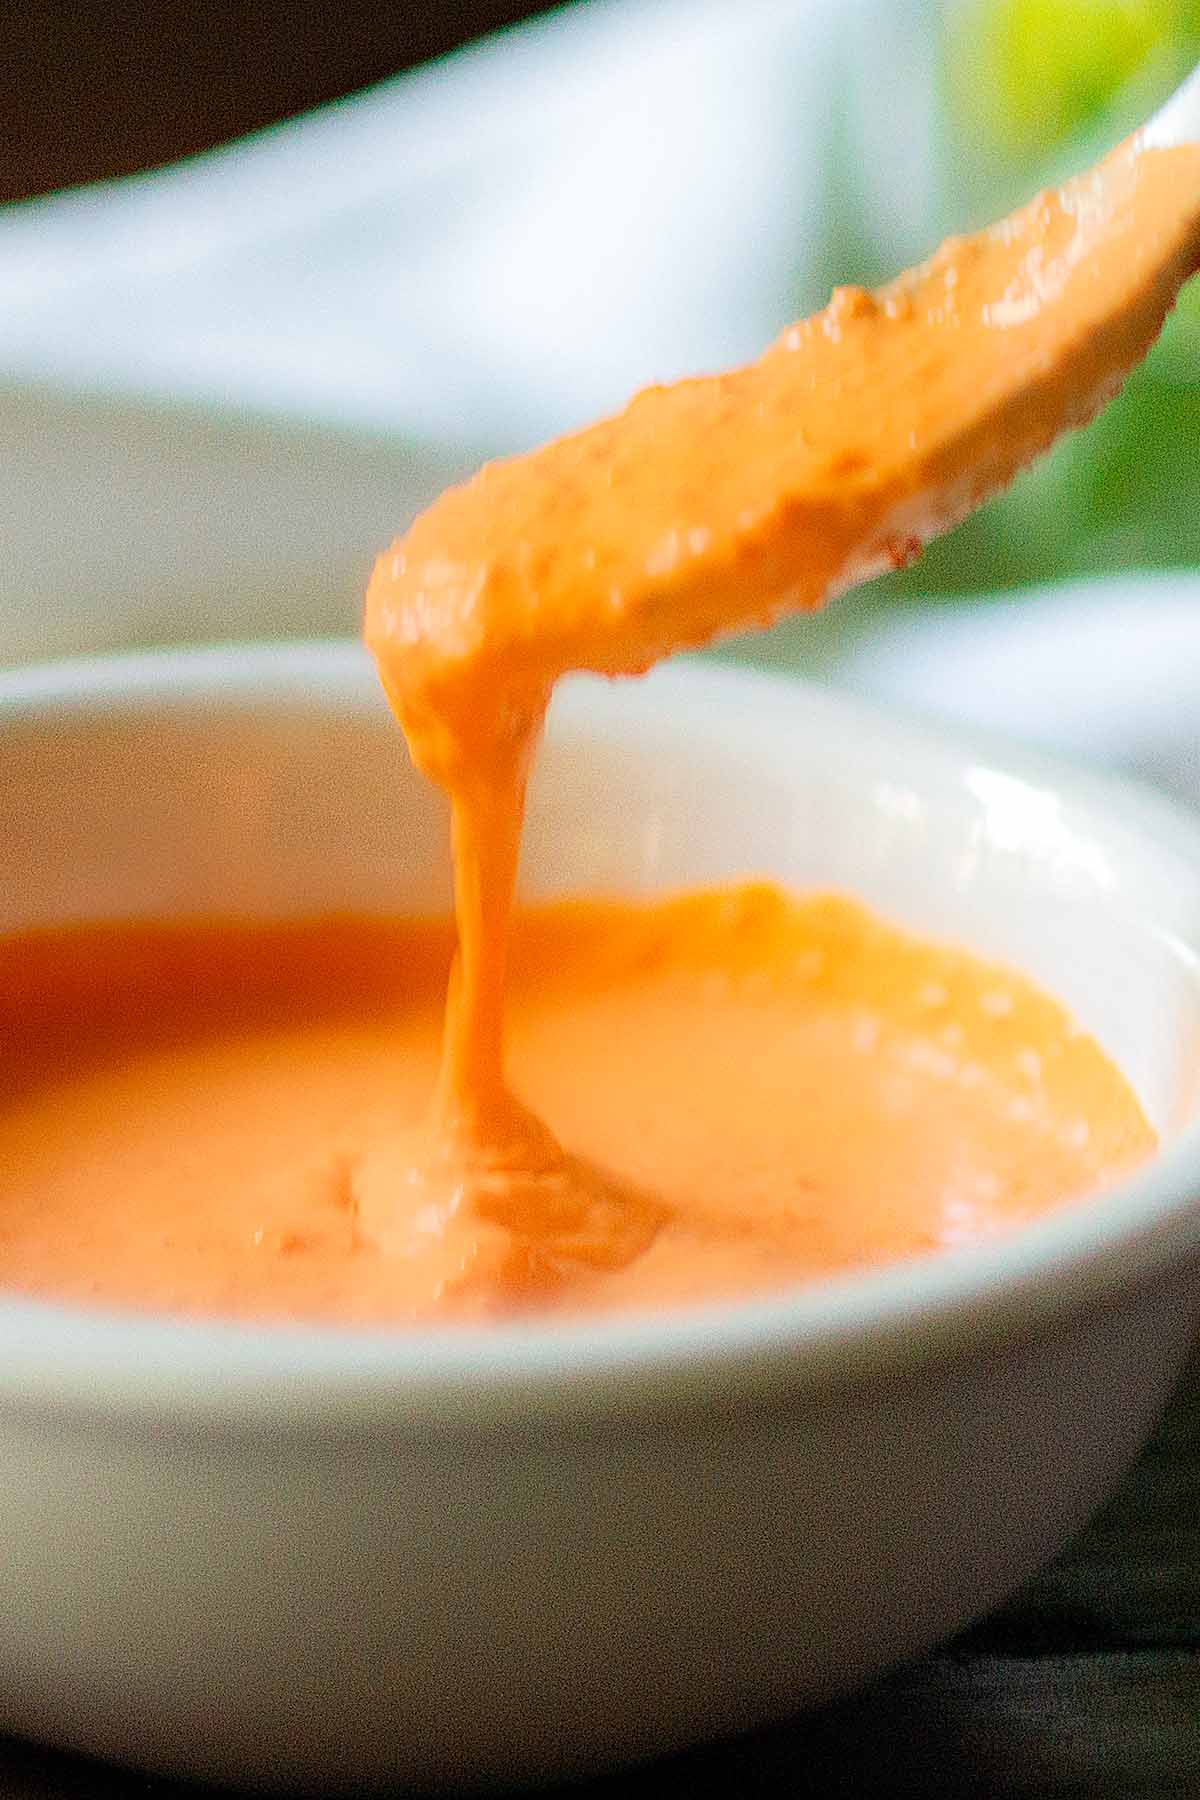 A bowl of roasted red pepper sauce being spooned out.